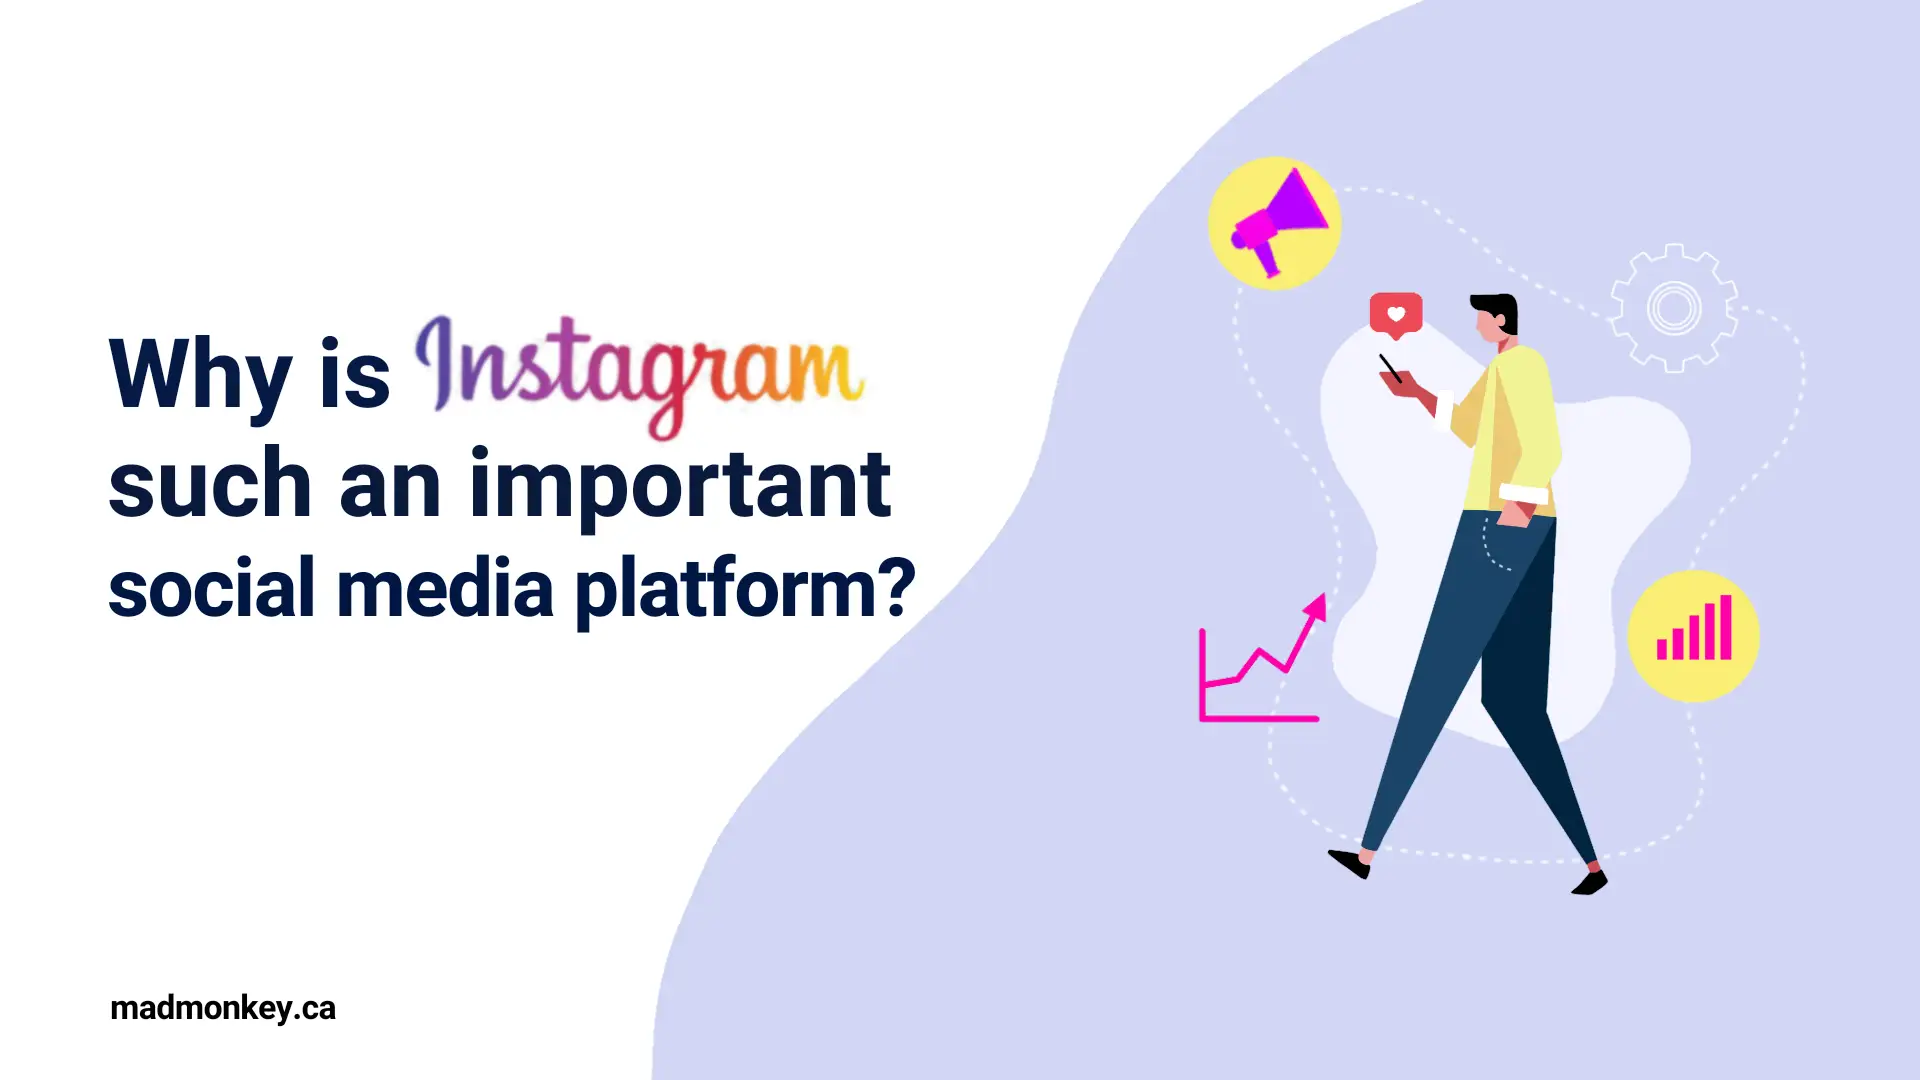 Mad Monkey Media blog talking about "Why is Instagram Such an Important Social Media Platform?"